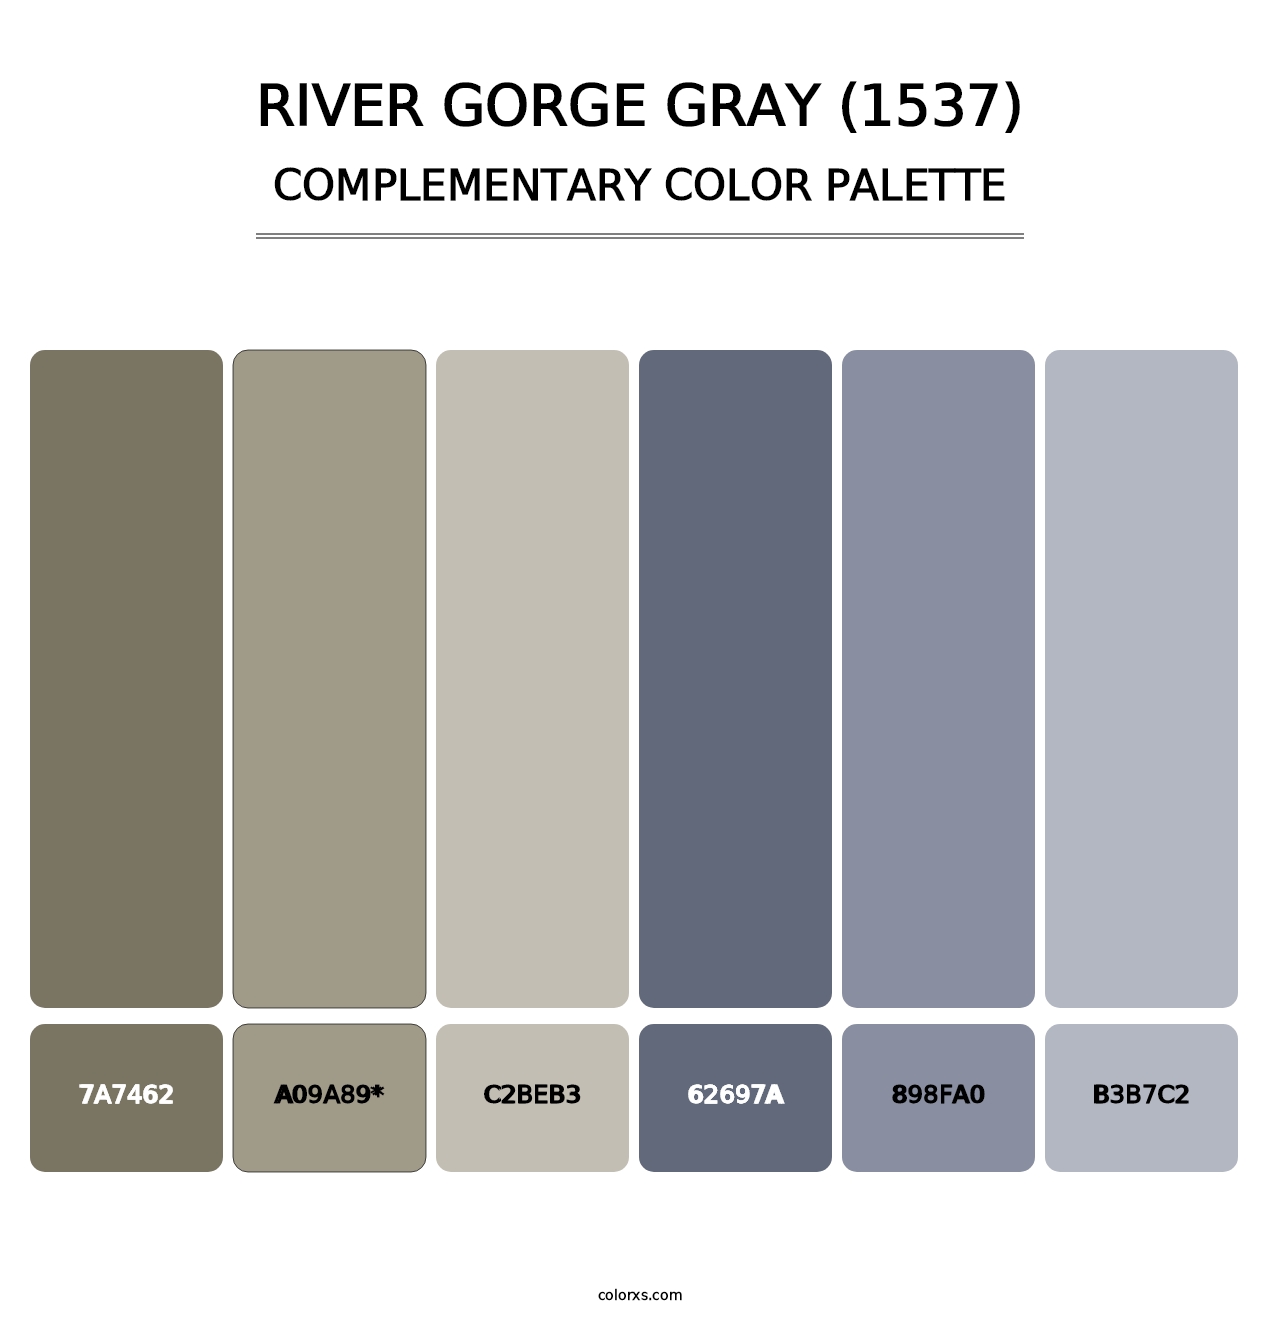 River Gorge Gray (1537) - Complementary Color Palette